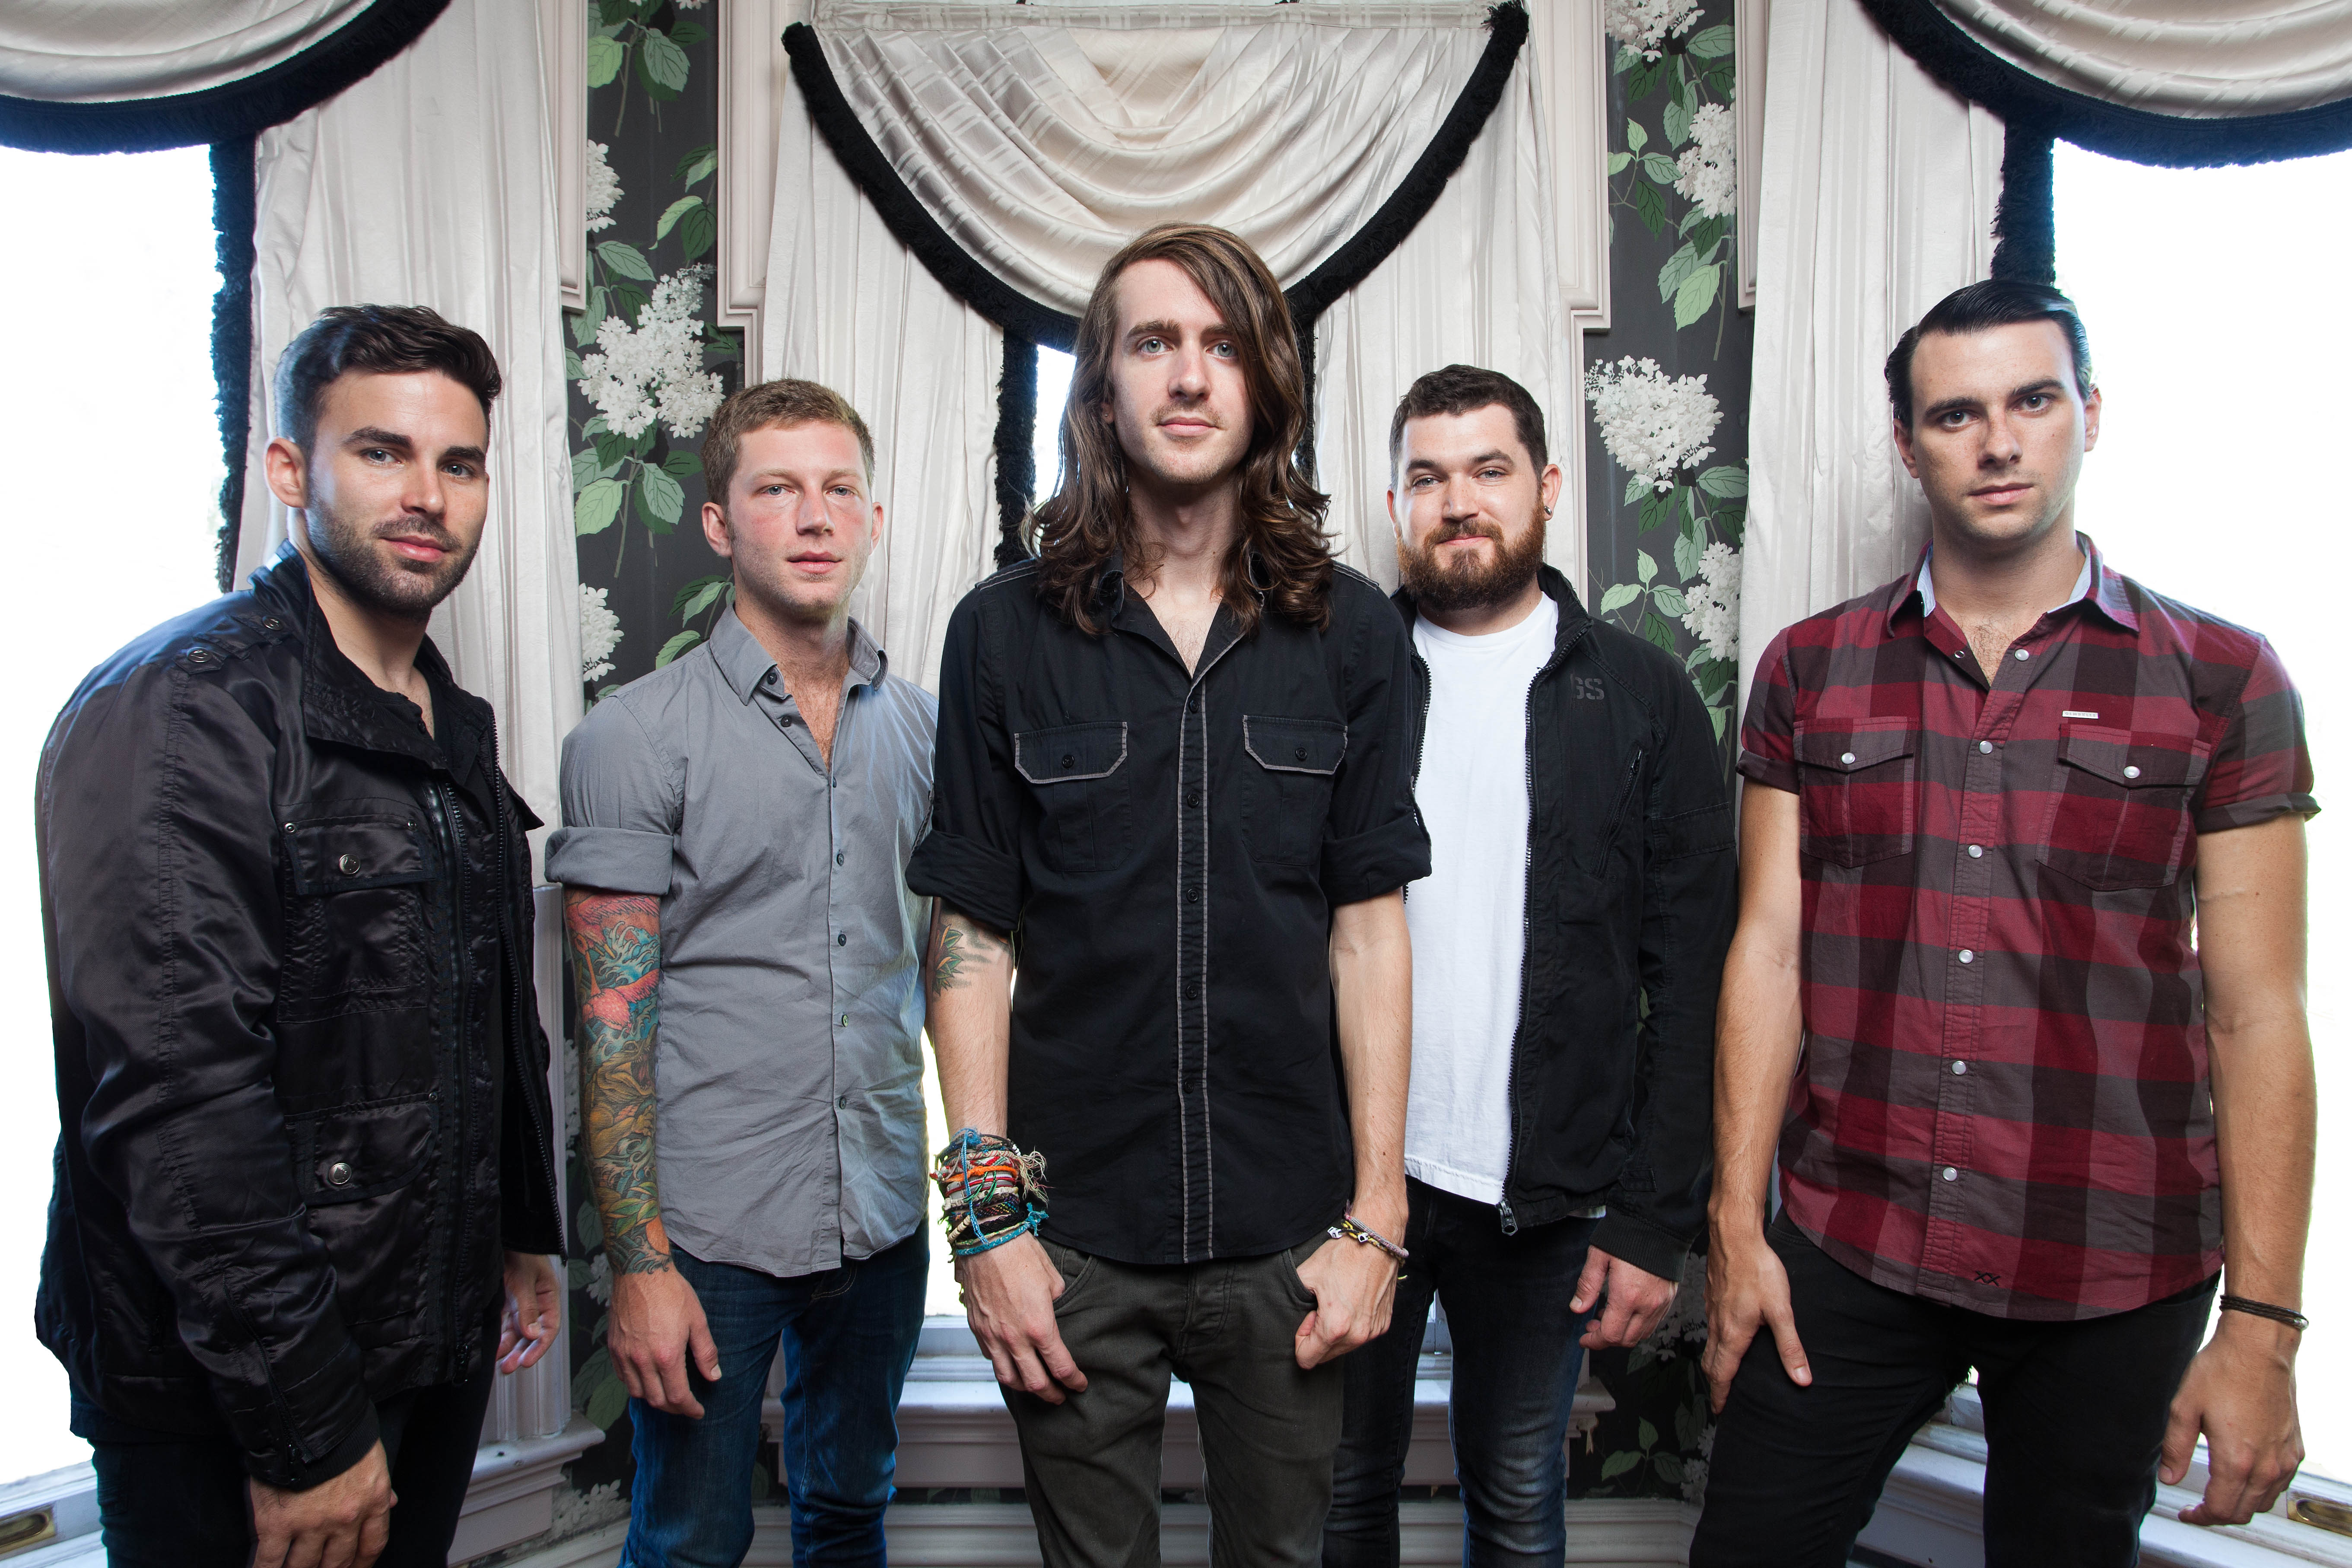 Amazing Mayday Parade Pictures & Backgrounds